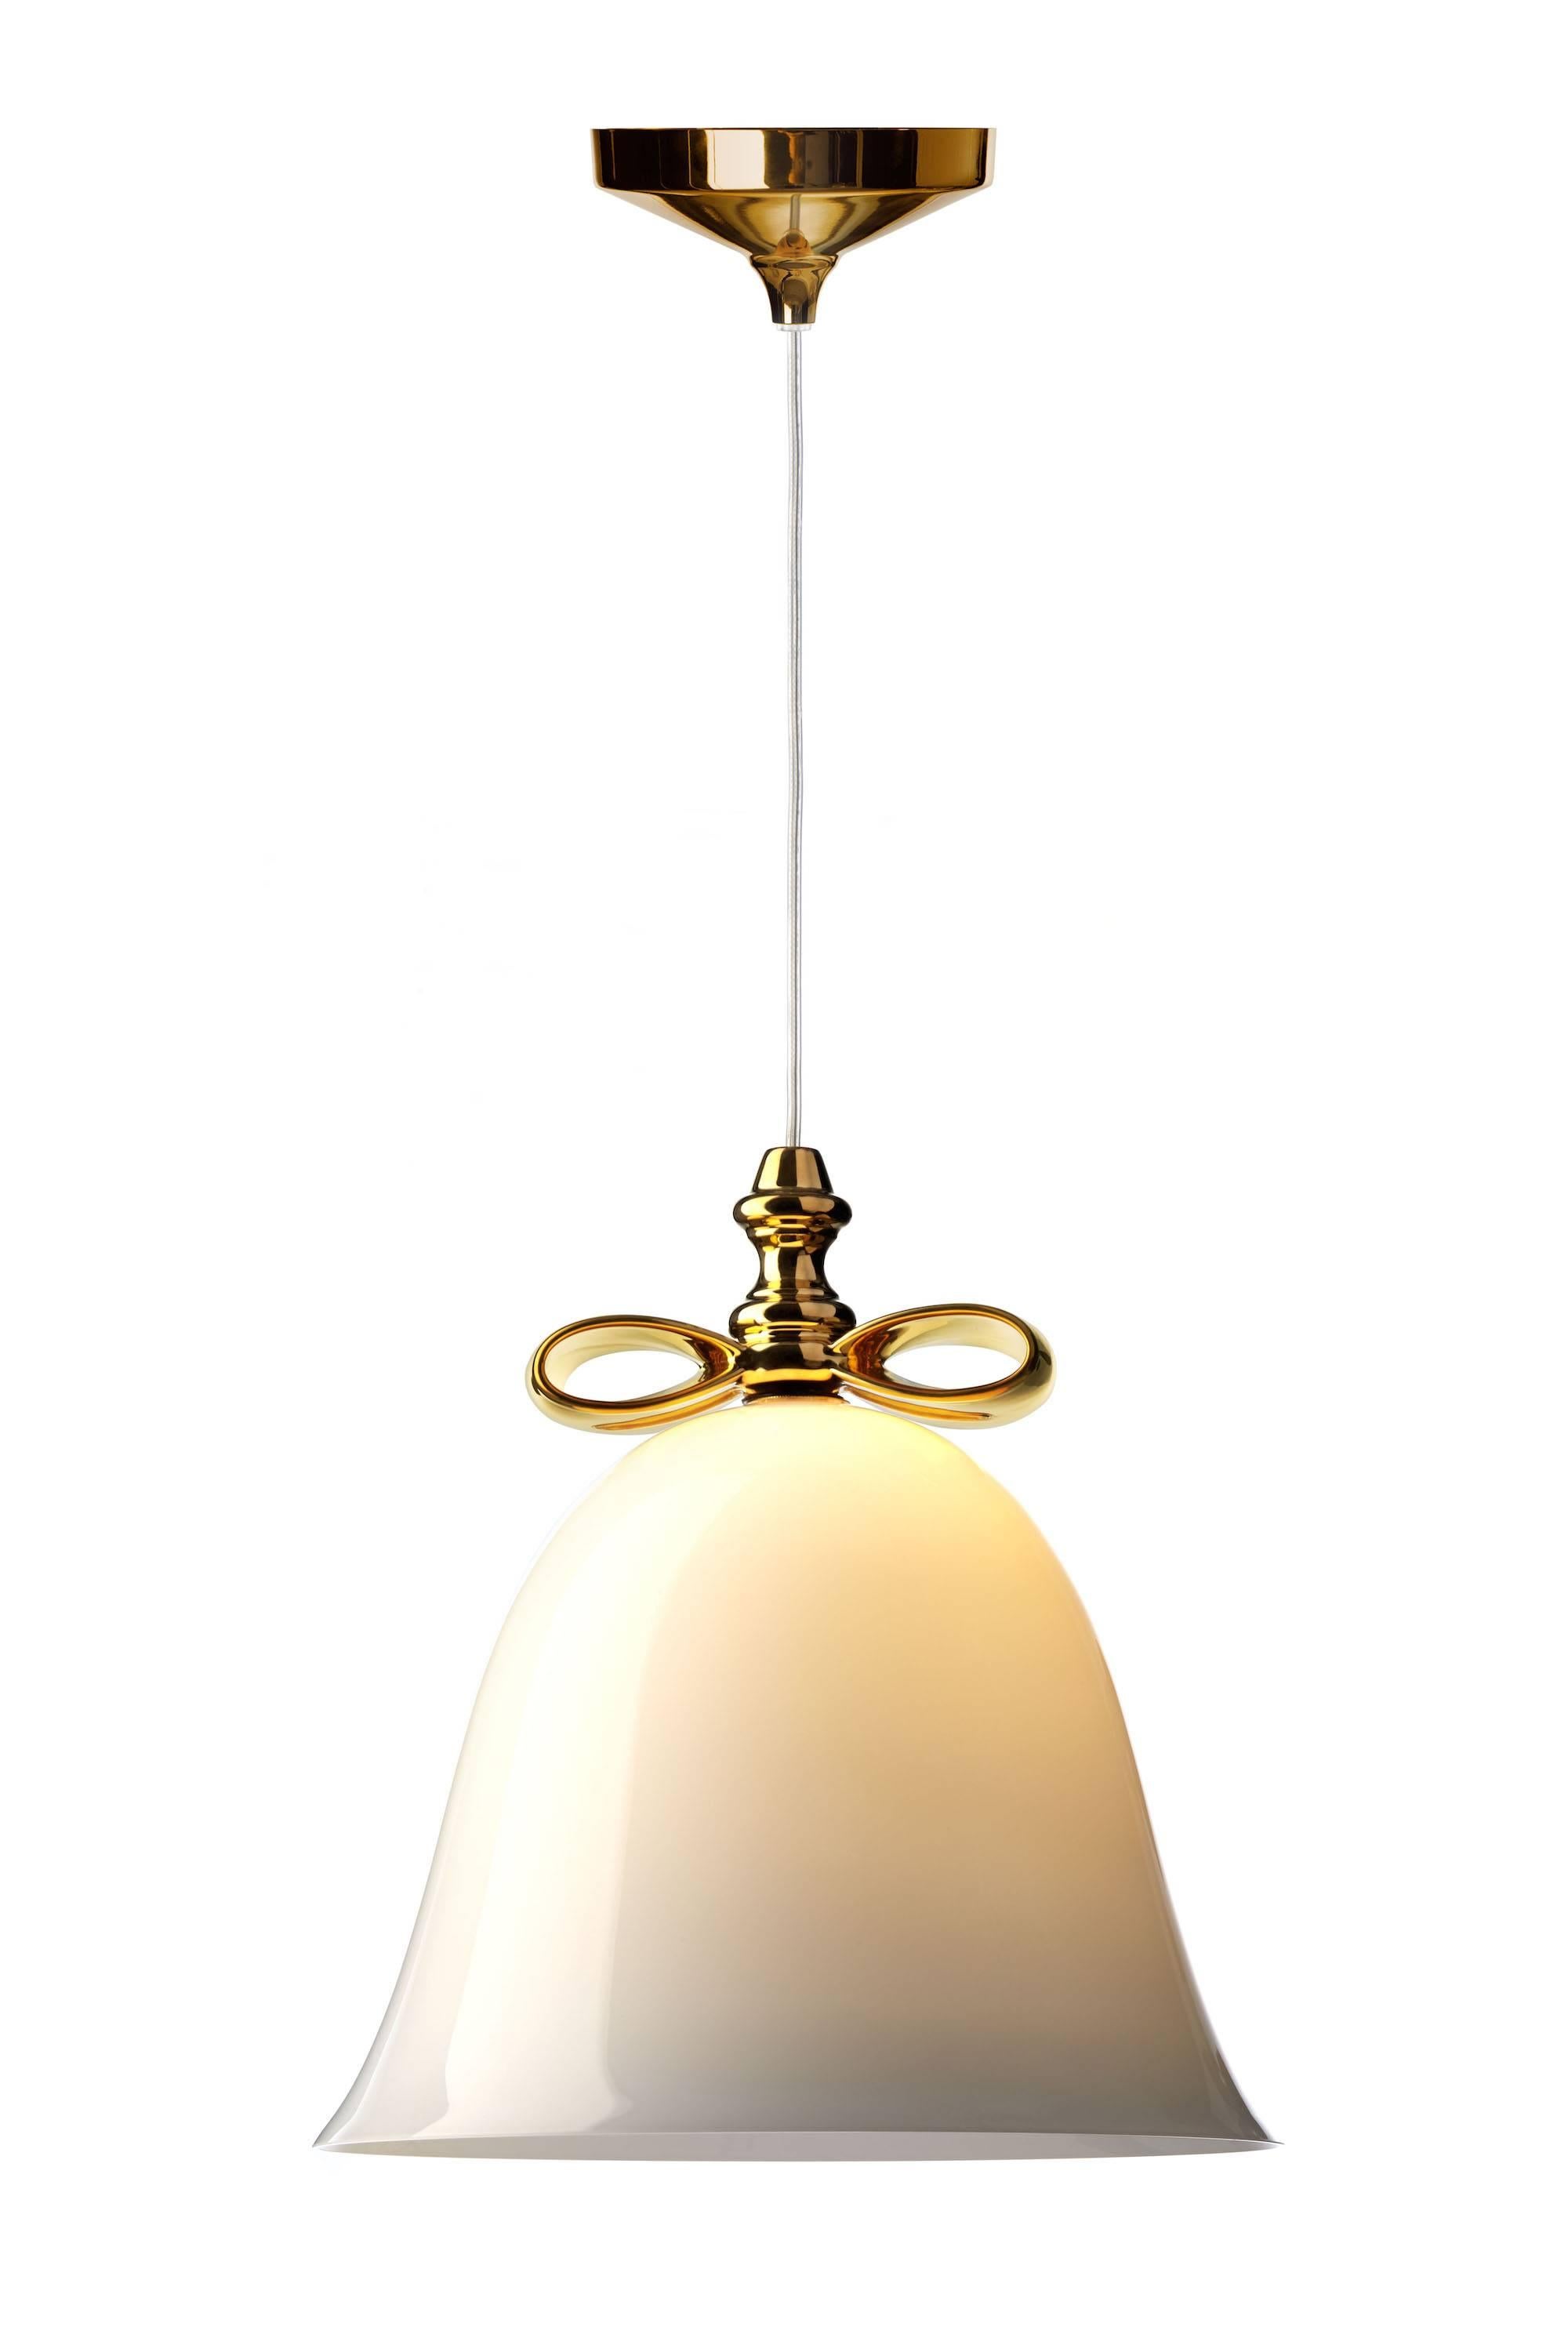 Modern Moooi Bell Lamp by Marcel Wanders in Mouth Blown Glass with Ceramic Bow For Sale